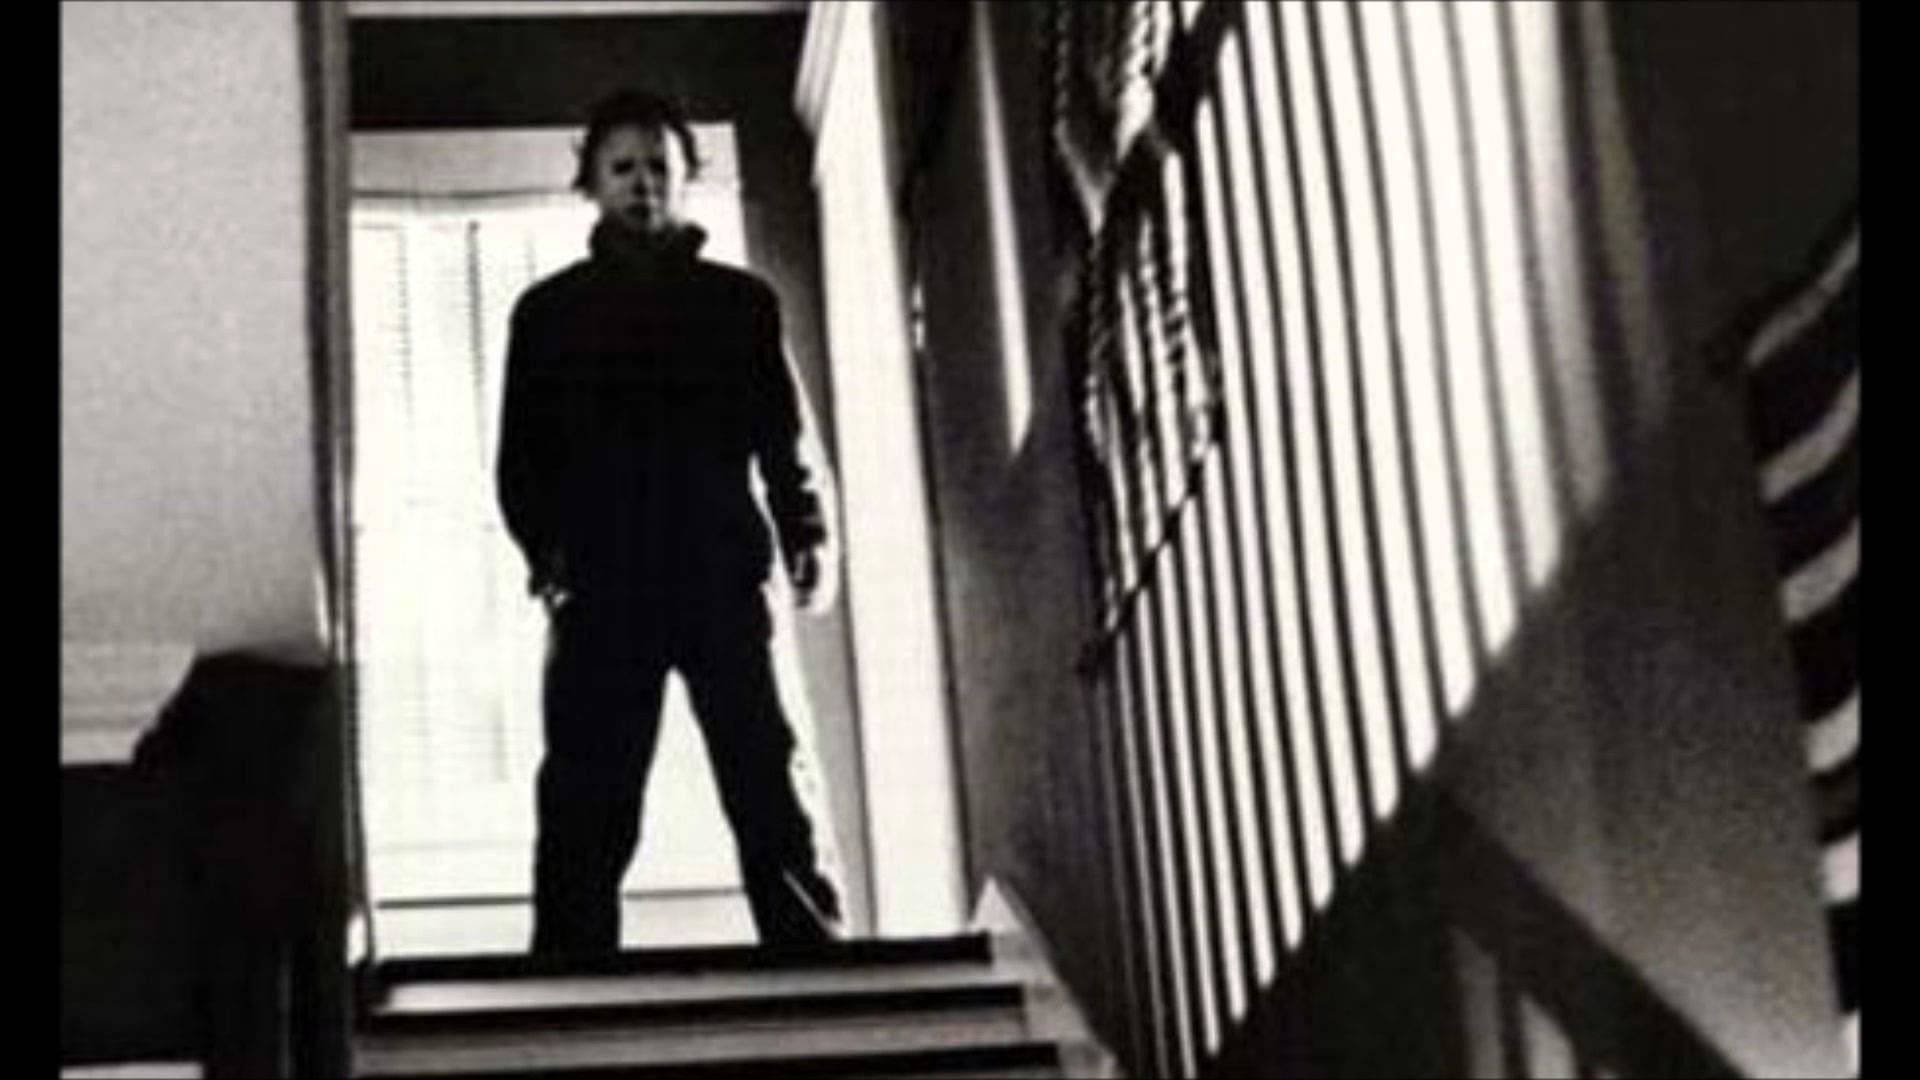 Michael Myers menacingly appearing at the top of the stairs in a suspenseful scene Wallpaper